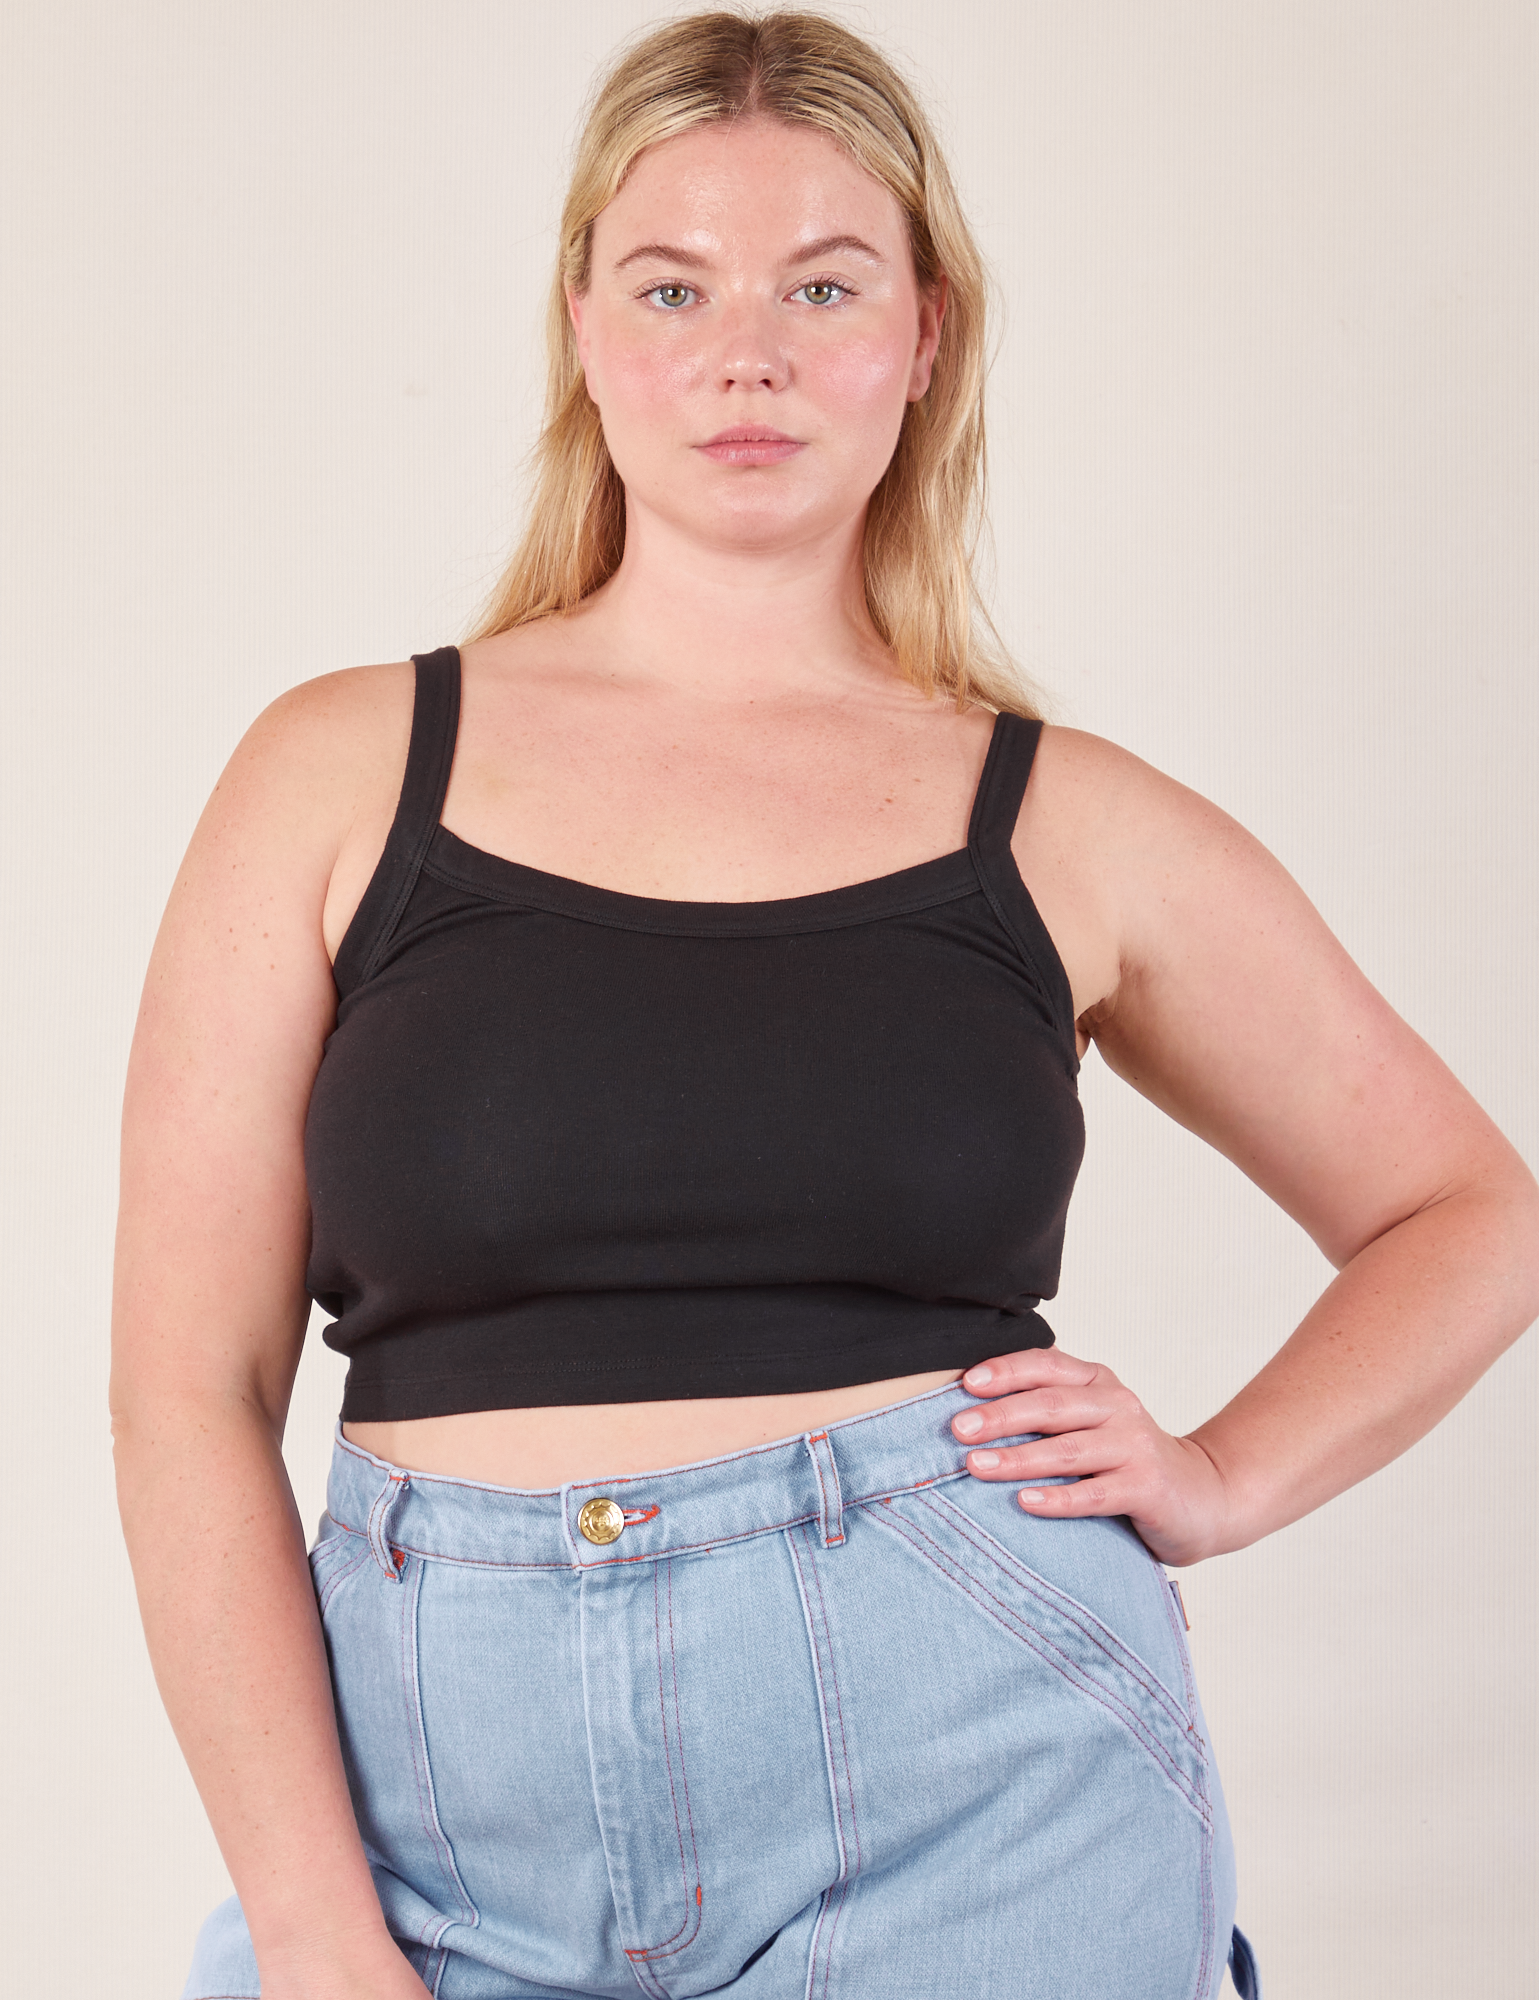 Lish is 5’8” and wearing M Cropped Cami in Basic Black